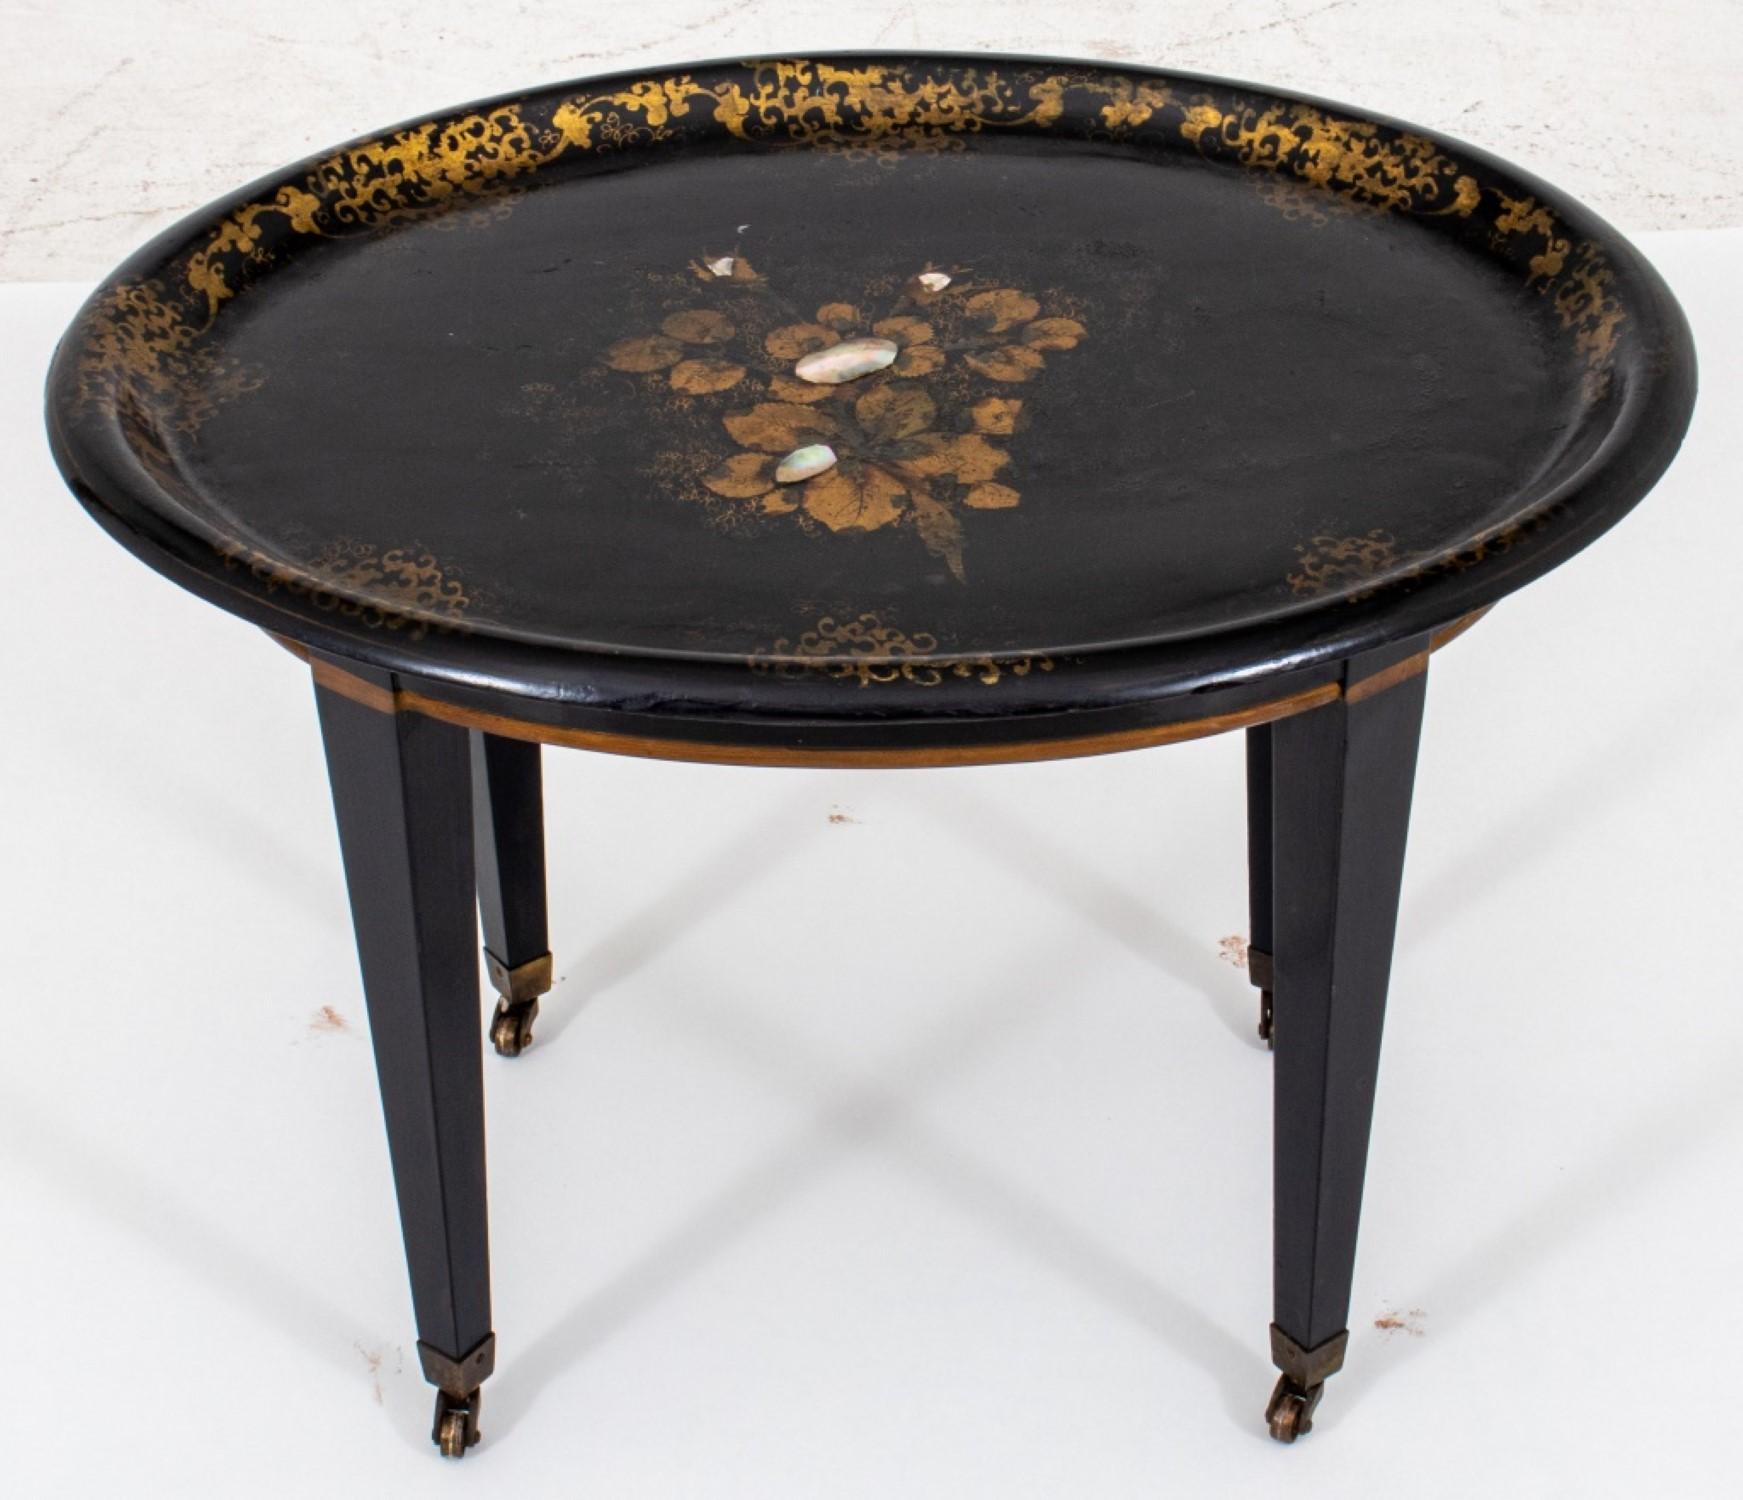 Victorian lacquered wood tray repurposed as a side table. The top is adorned with gilded floral motifs and inlaid mother-of-pearl accents.

Dealer: S138XX